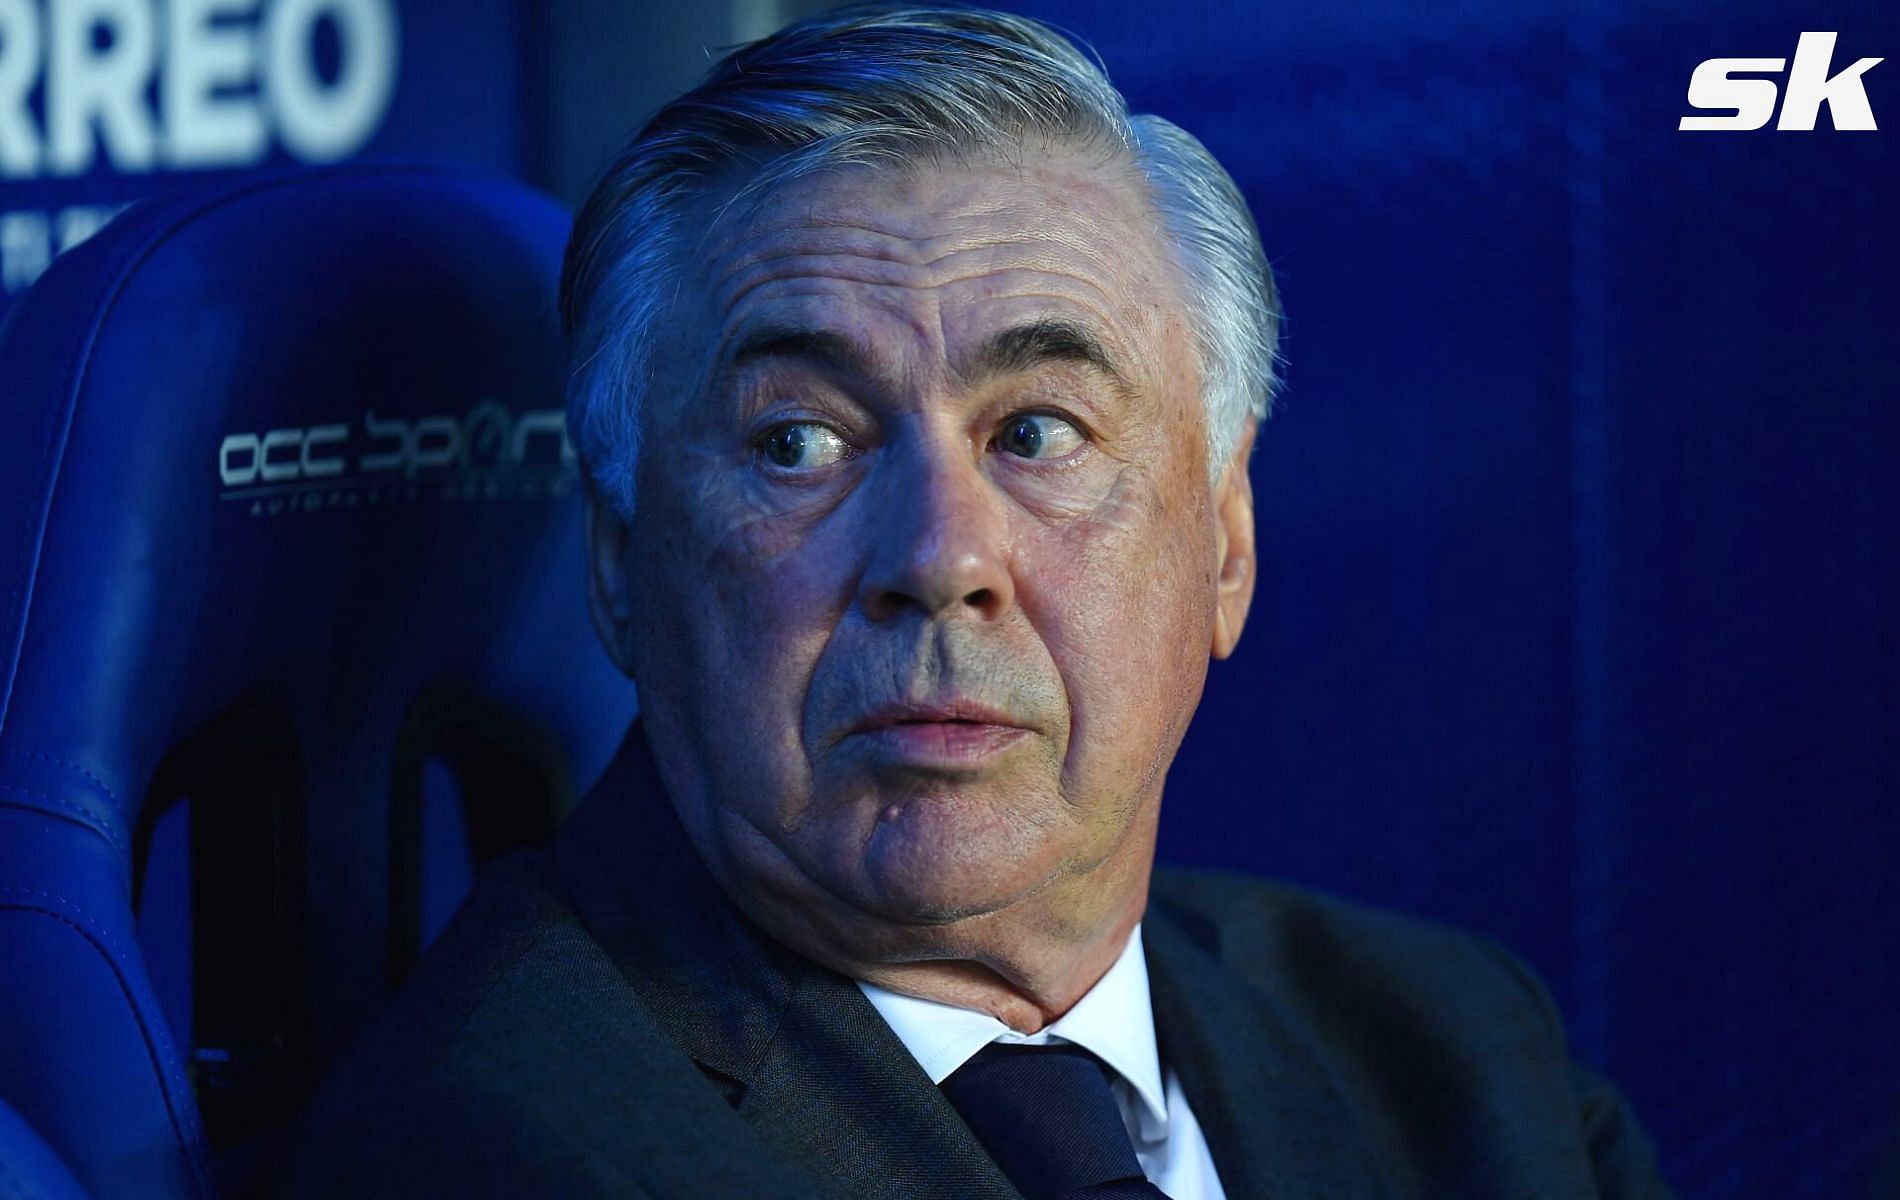 Carlo Ancelotti would have loved some former Real Madrid legends play in the current squad.